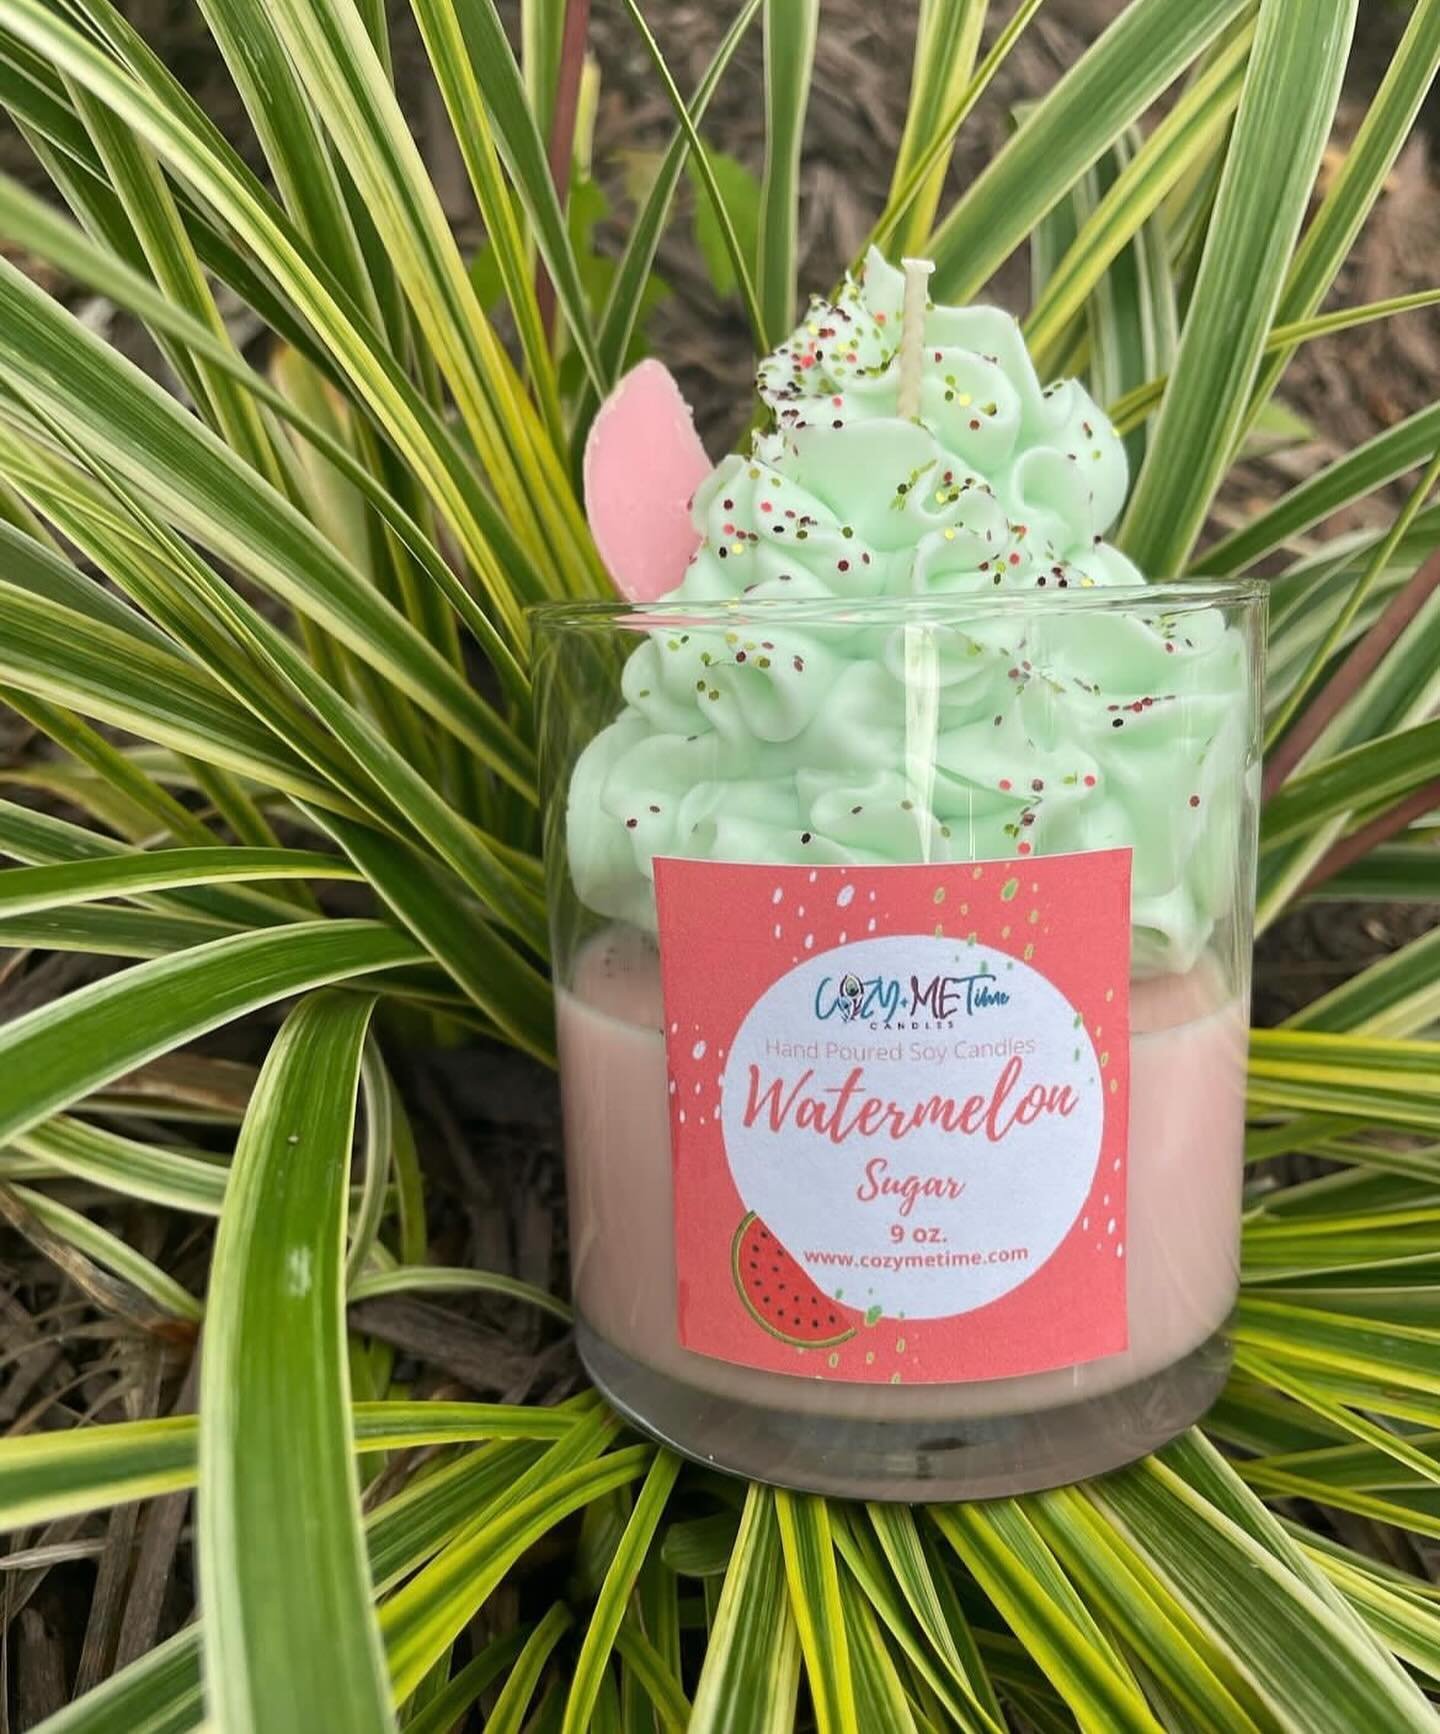 Spring Favorites are back!! Go grab Just Peachy, Watermelon Sugar, or Coconut Lime!! Www.cozymetime.com